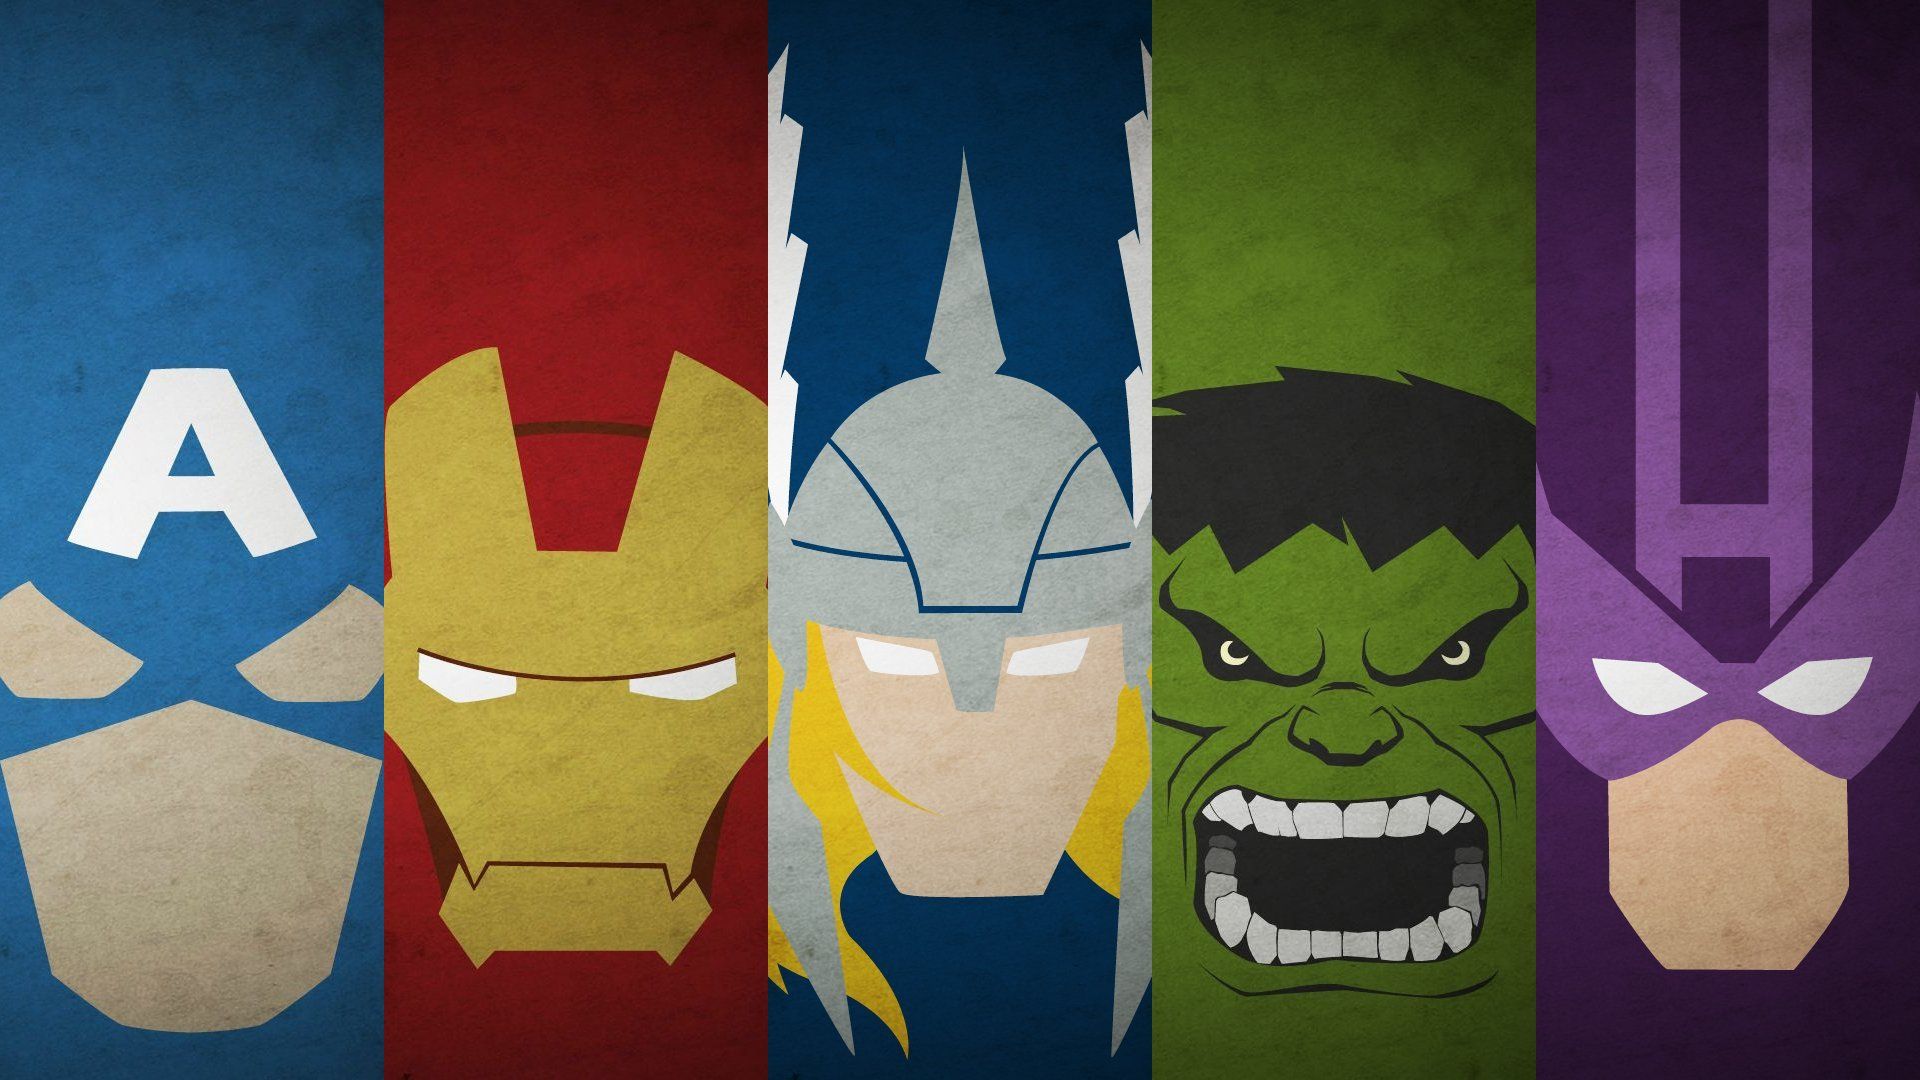 Wallpaper! Mostly Geeky Nerdy Stuff Nothing Too Artsy. • R Pics. Marvel Wallpaper, Avengers Wallpaper, Nerdy Wallpaper